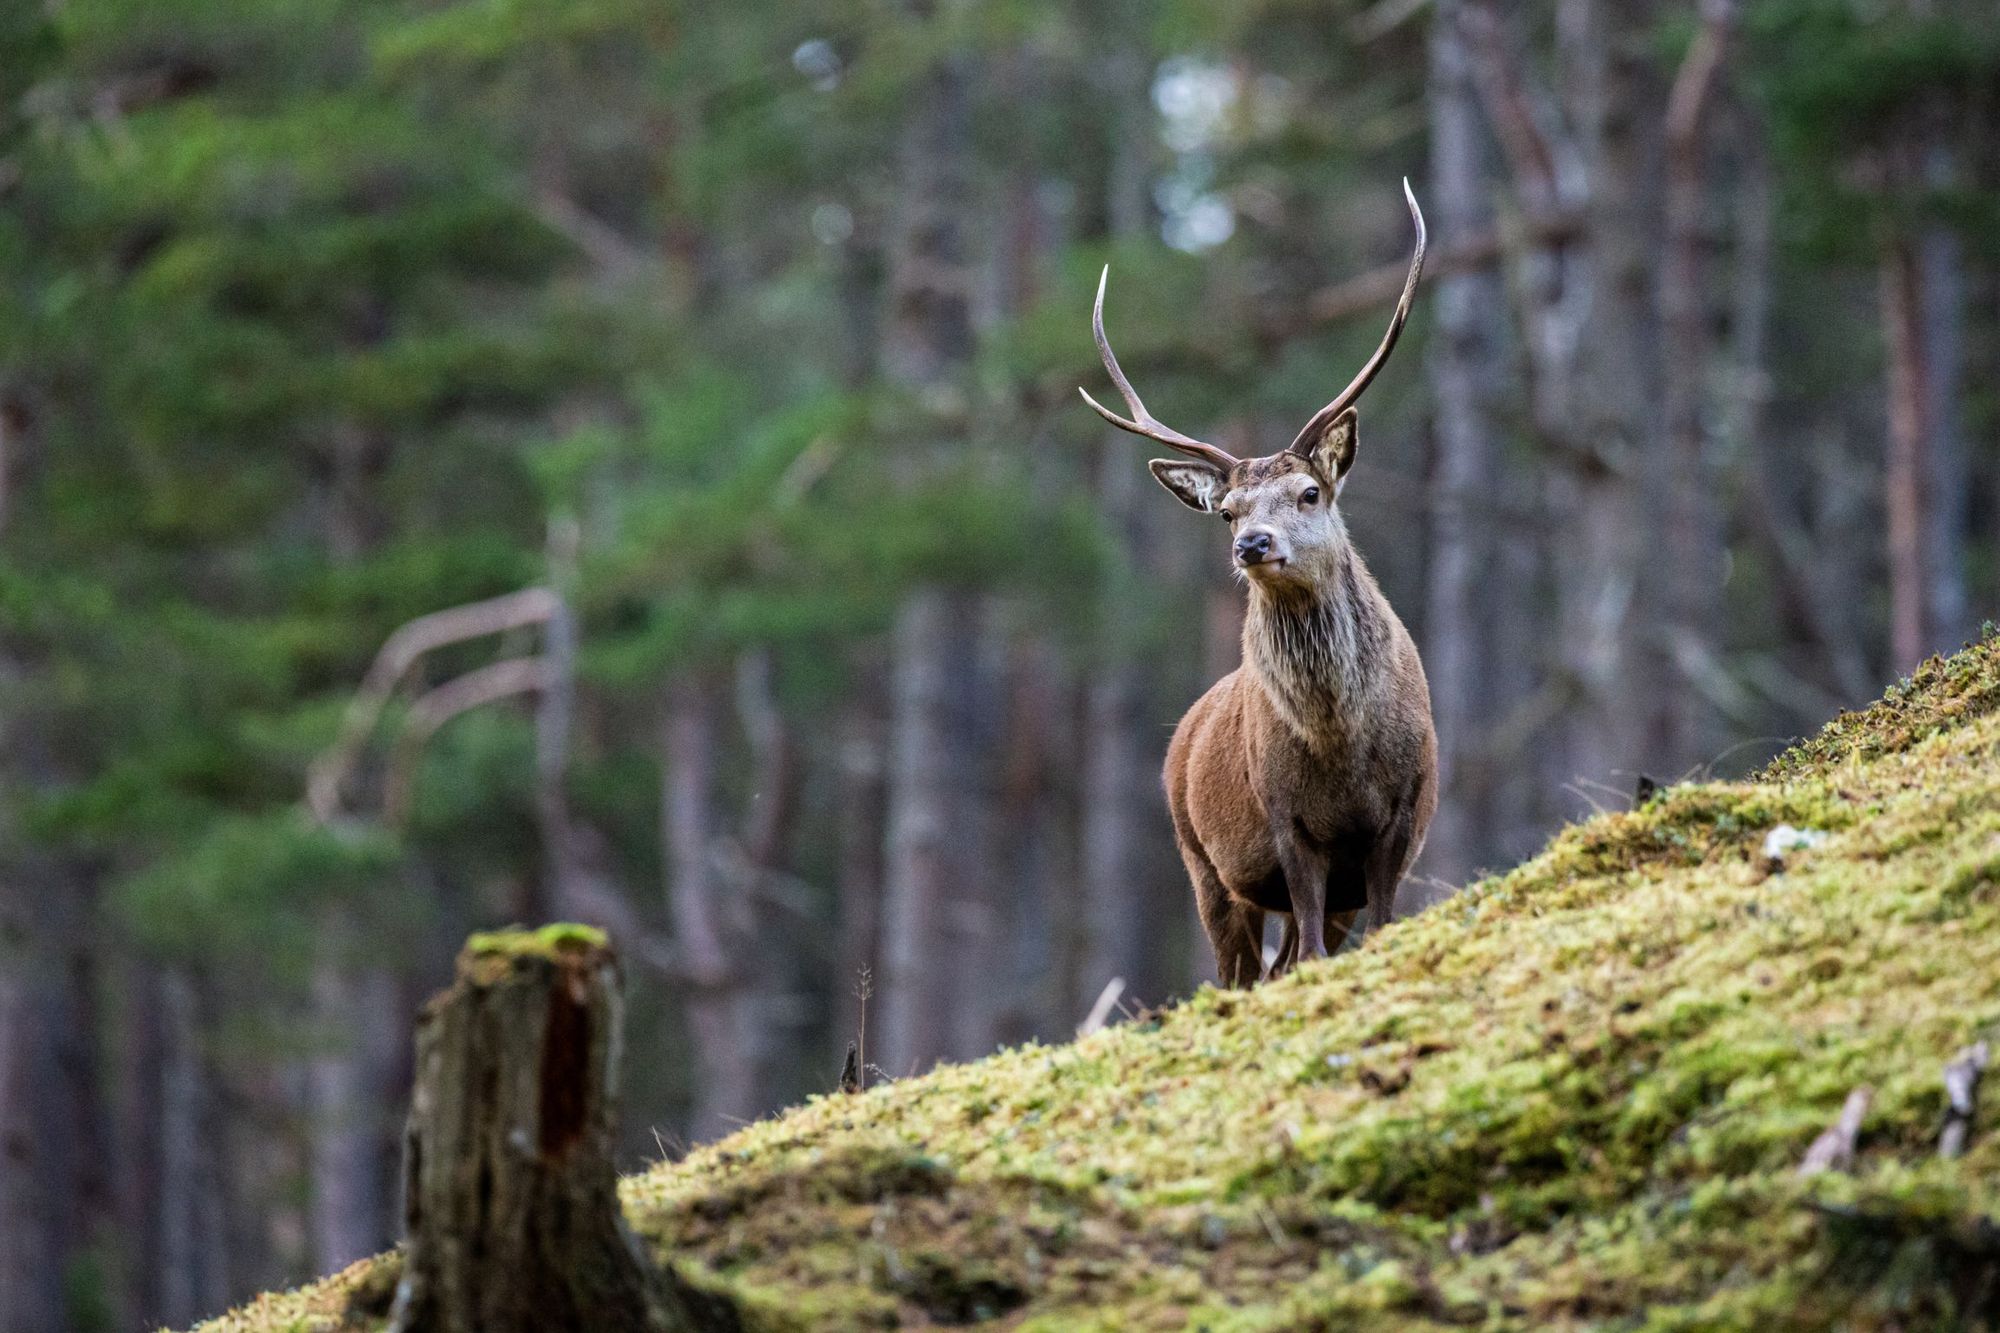 There are few better places on Earth to see deer or stags in the wild than the highlands of Scotland. Photo: Getty